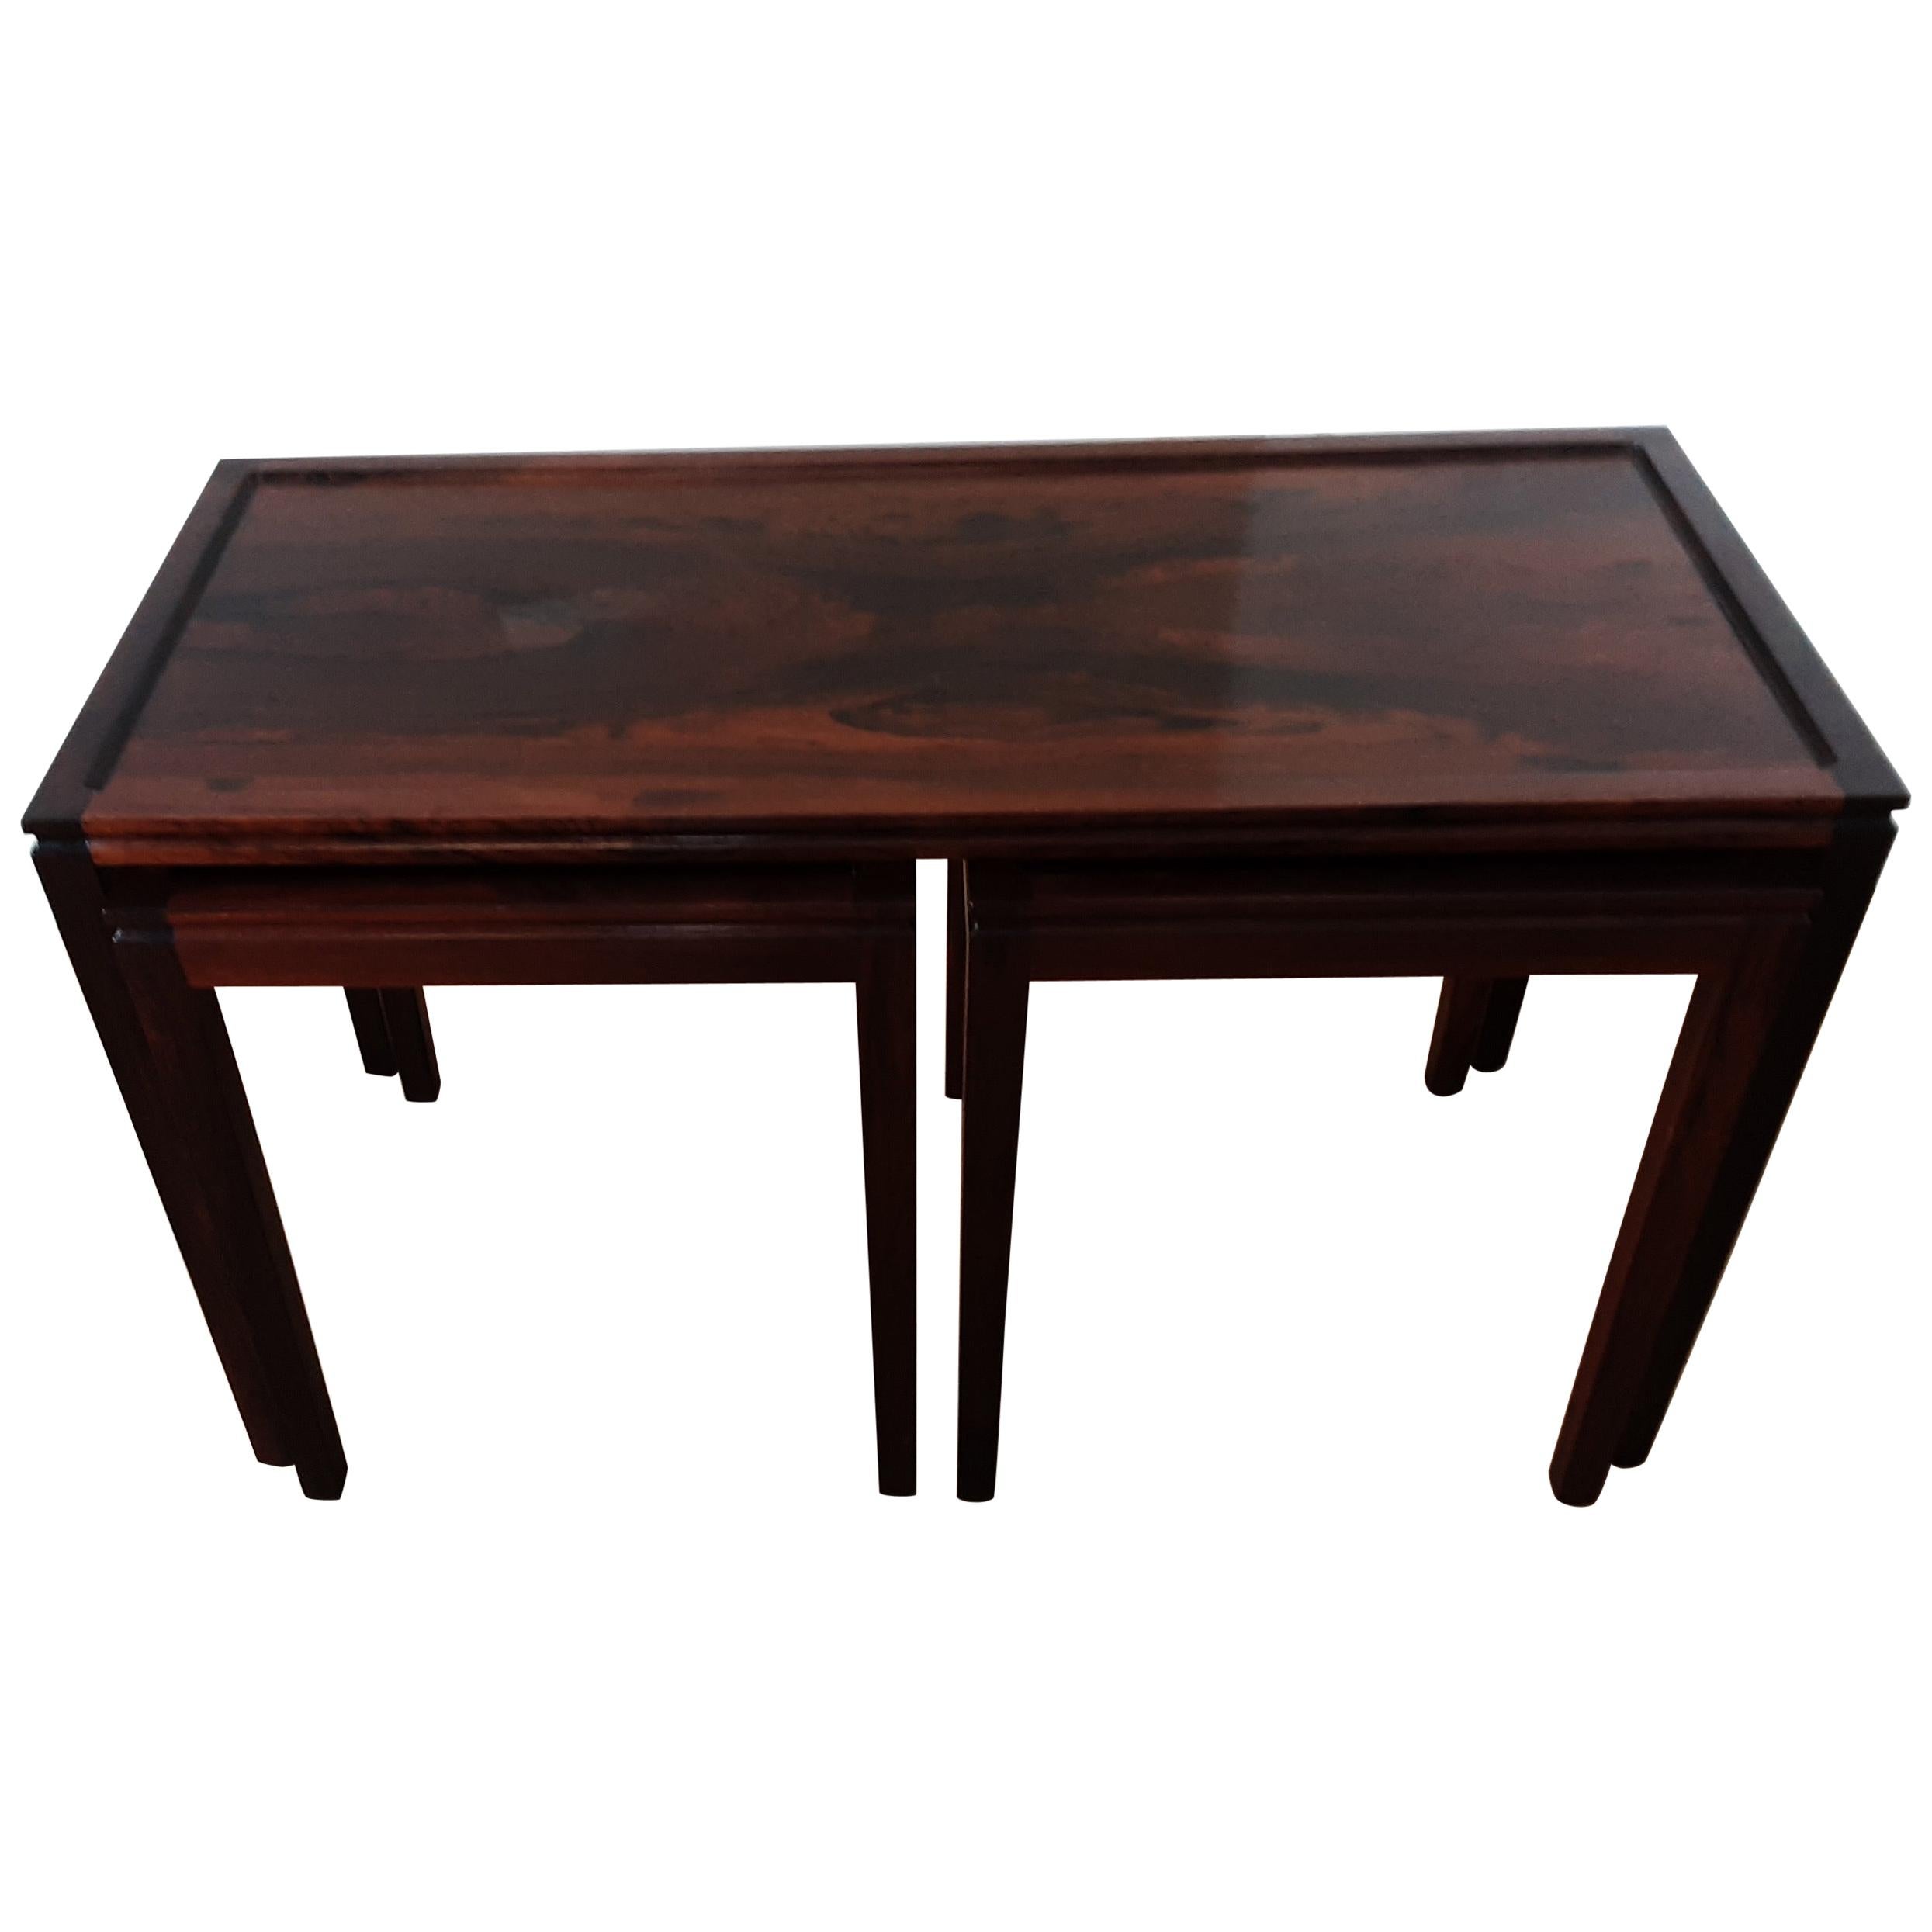 Midcentury Nest of Tables in Deep Brown Figured Rosewood circa 1960 from Denmark For Sale